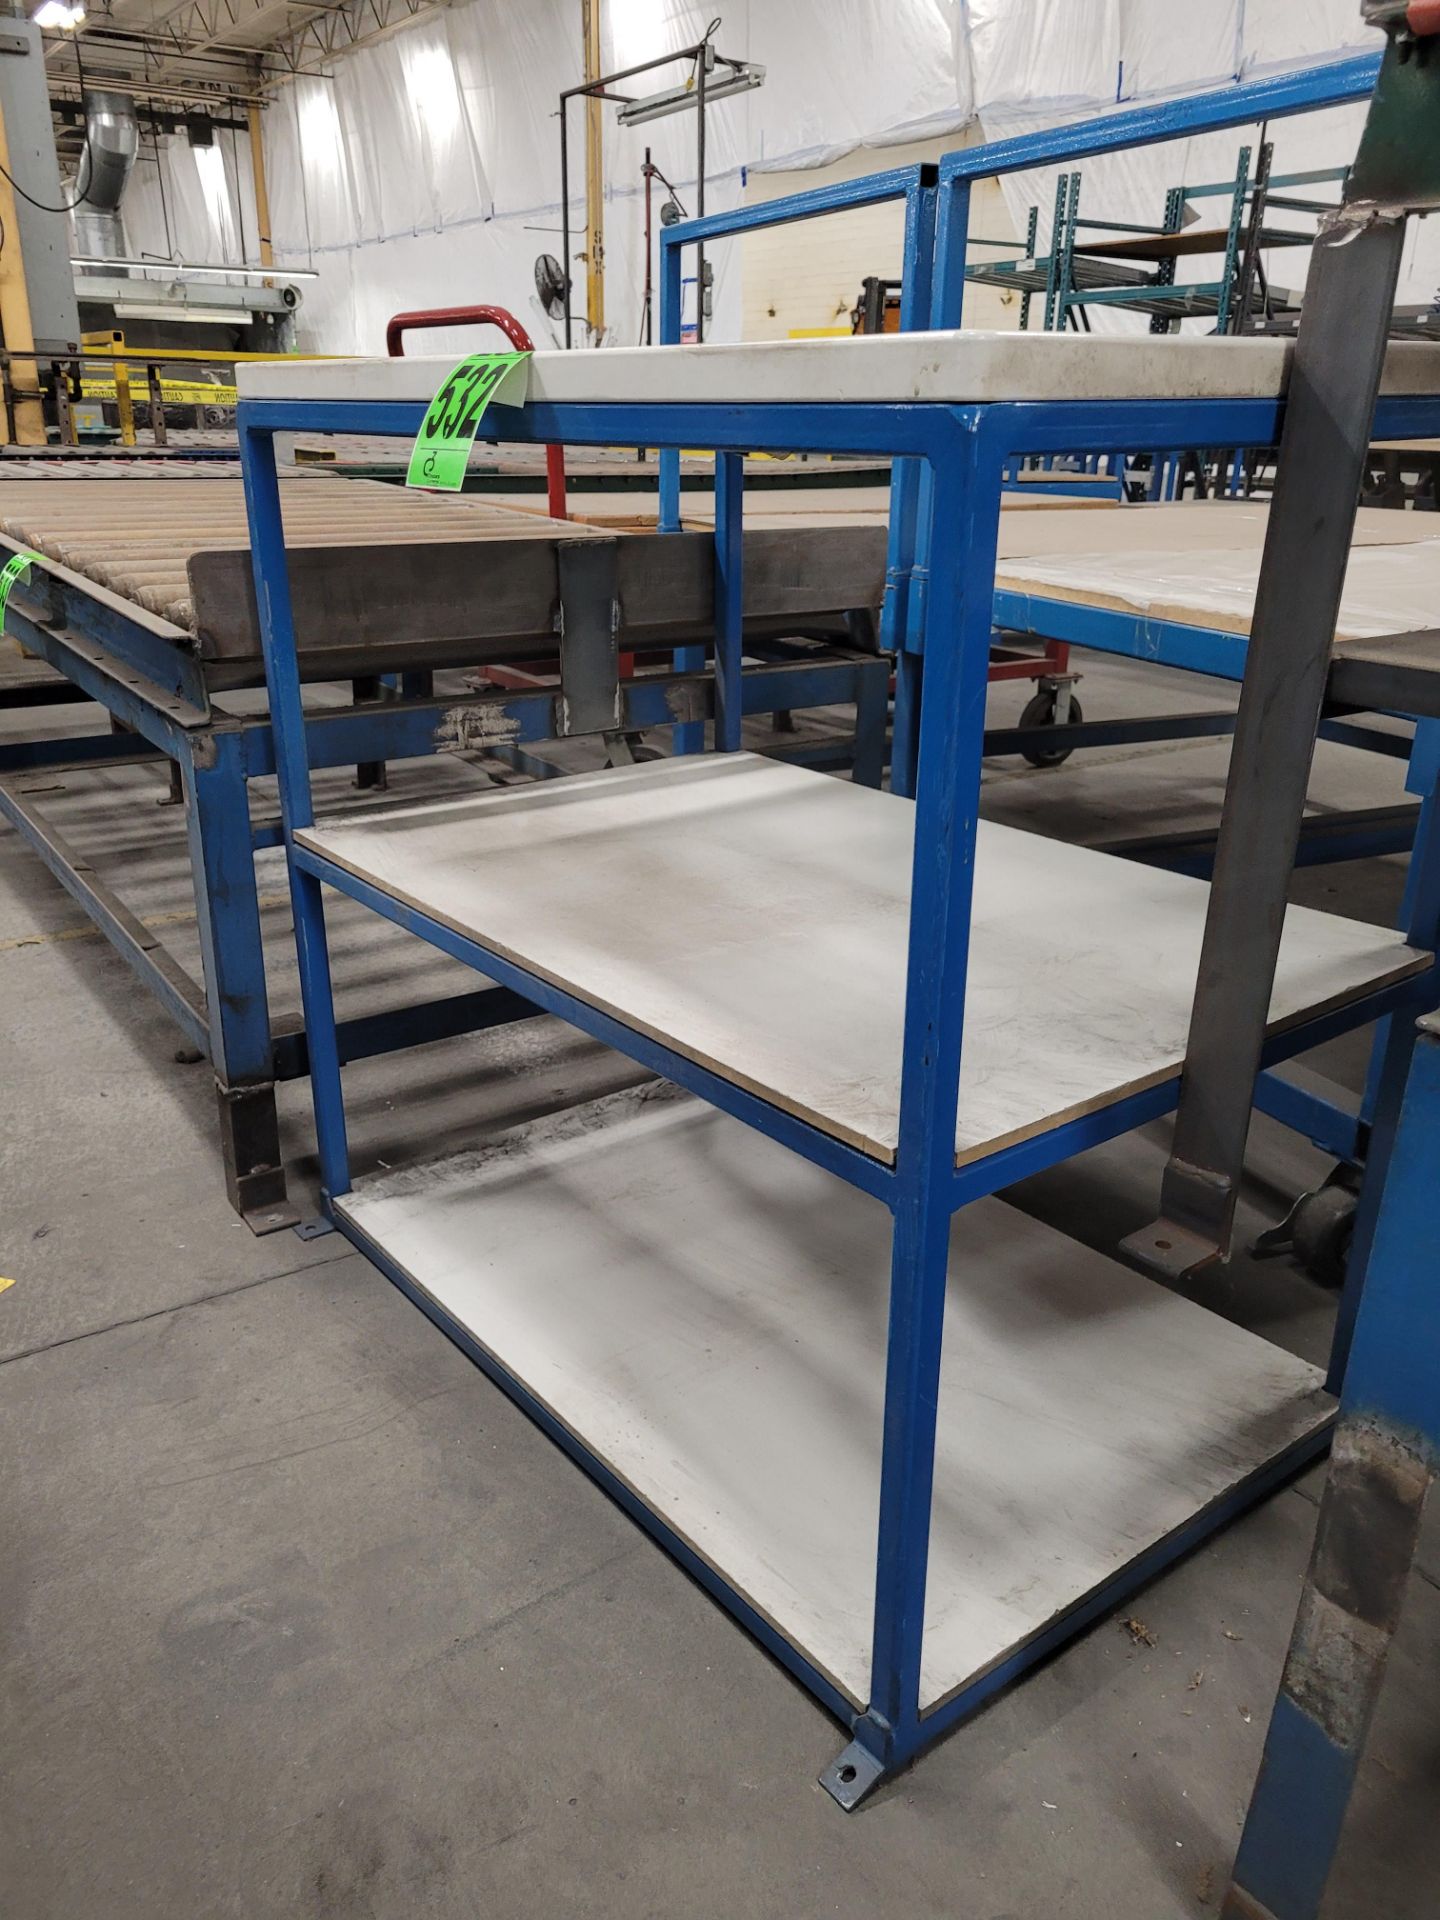 3-level steel frame shelving unit, plywood/composite surfaces - Image 2 of 2